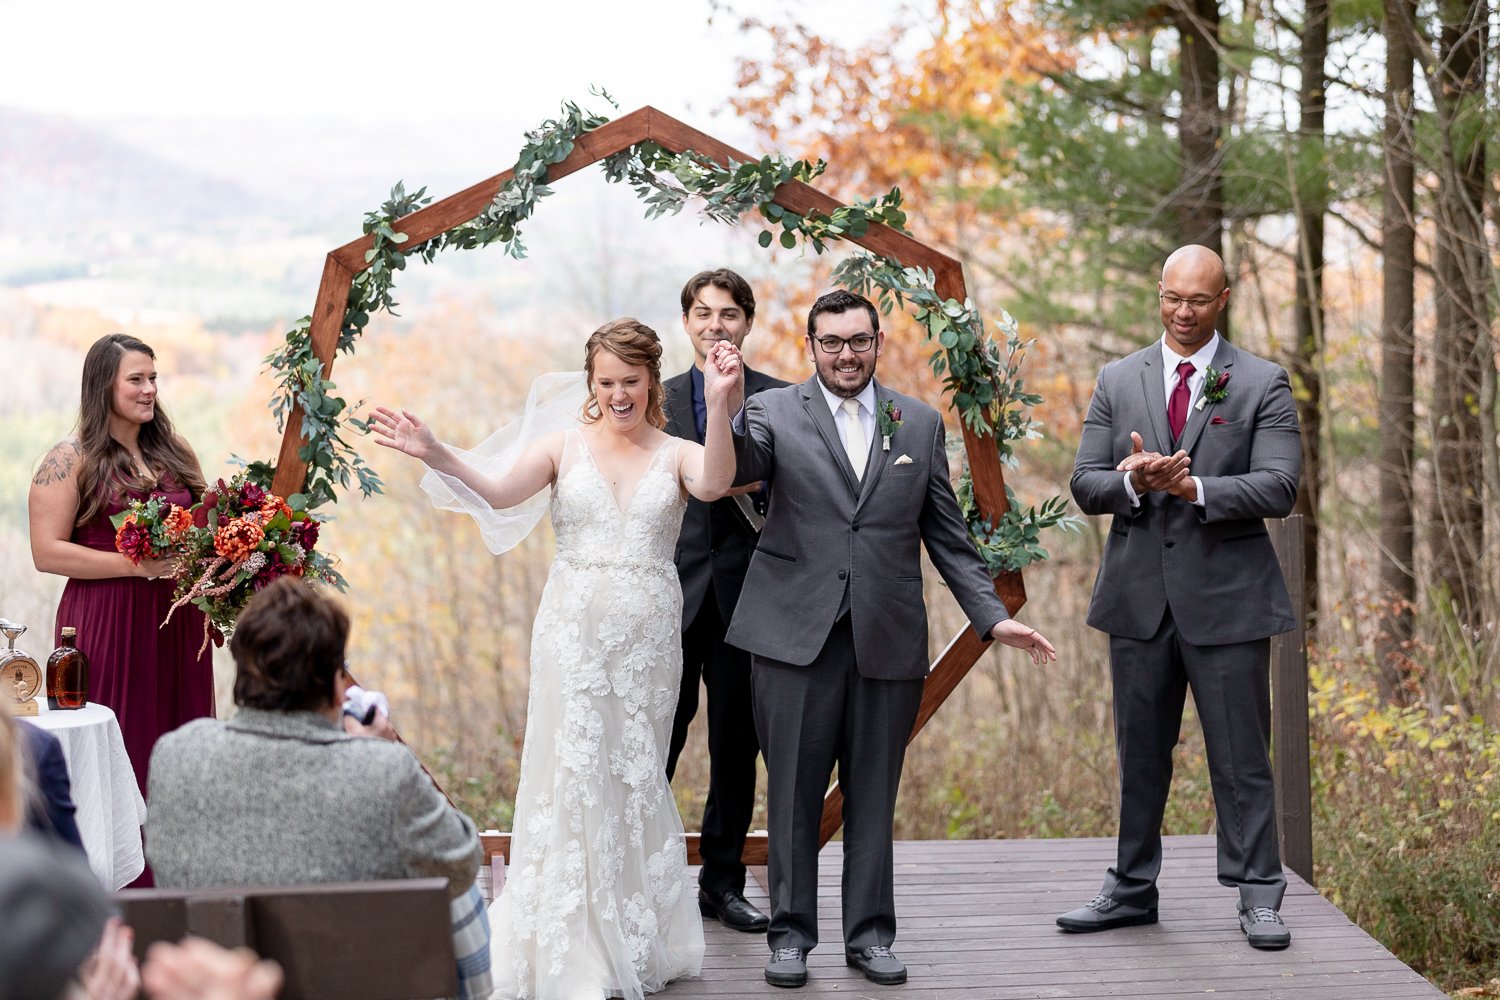 Wedding ceremony at Wildcat Mountain State Park